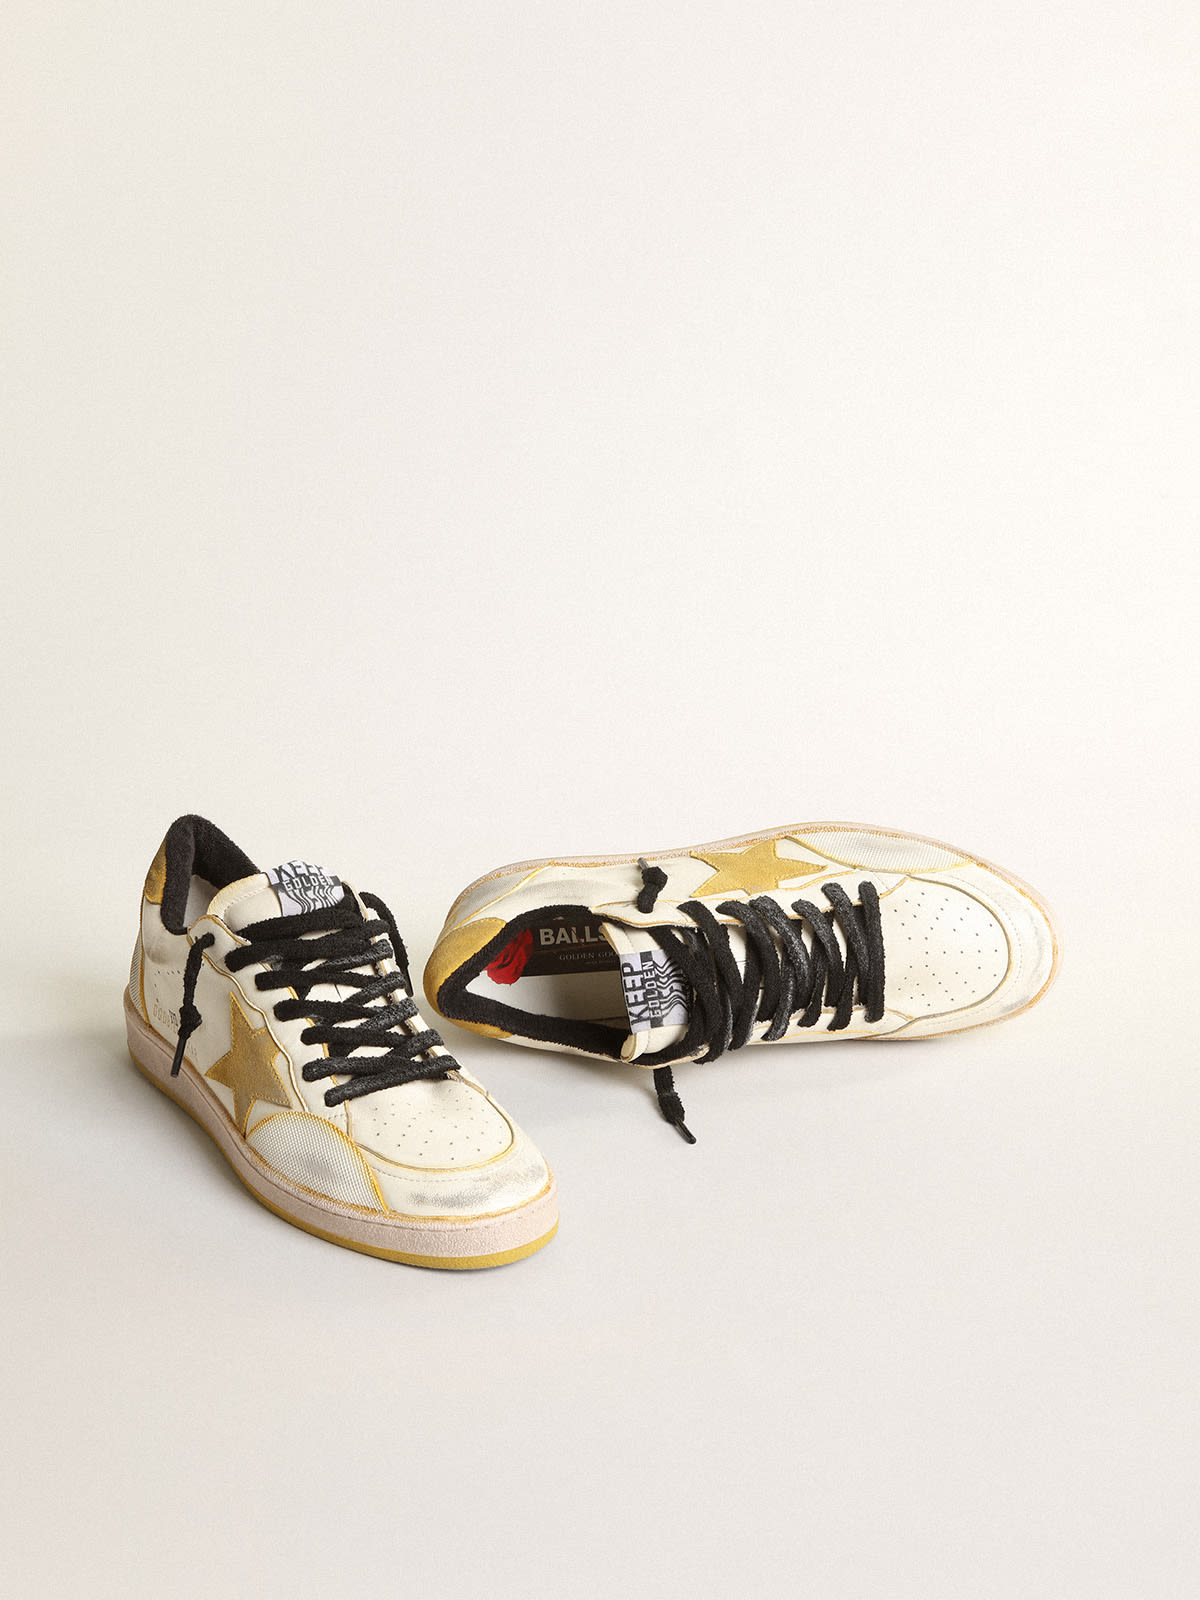 Golden Goose - Women’s Ball Star Pro in cream nappa with rubber inserts in 